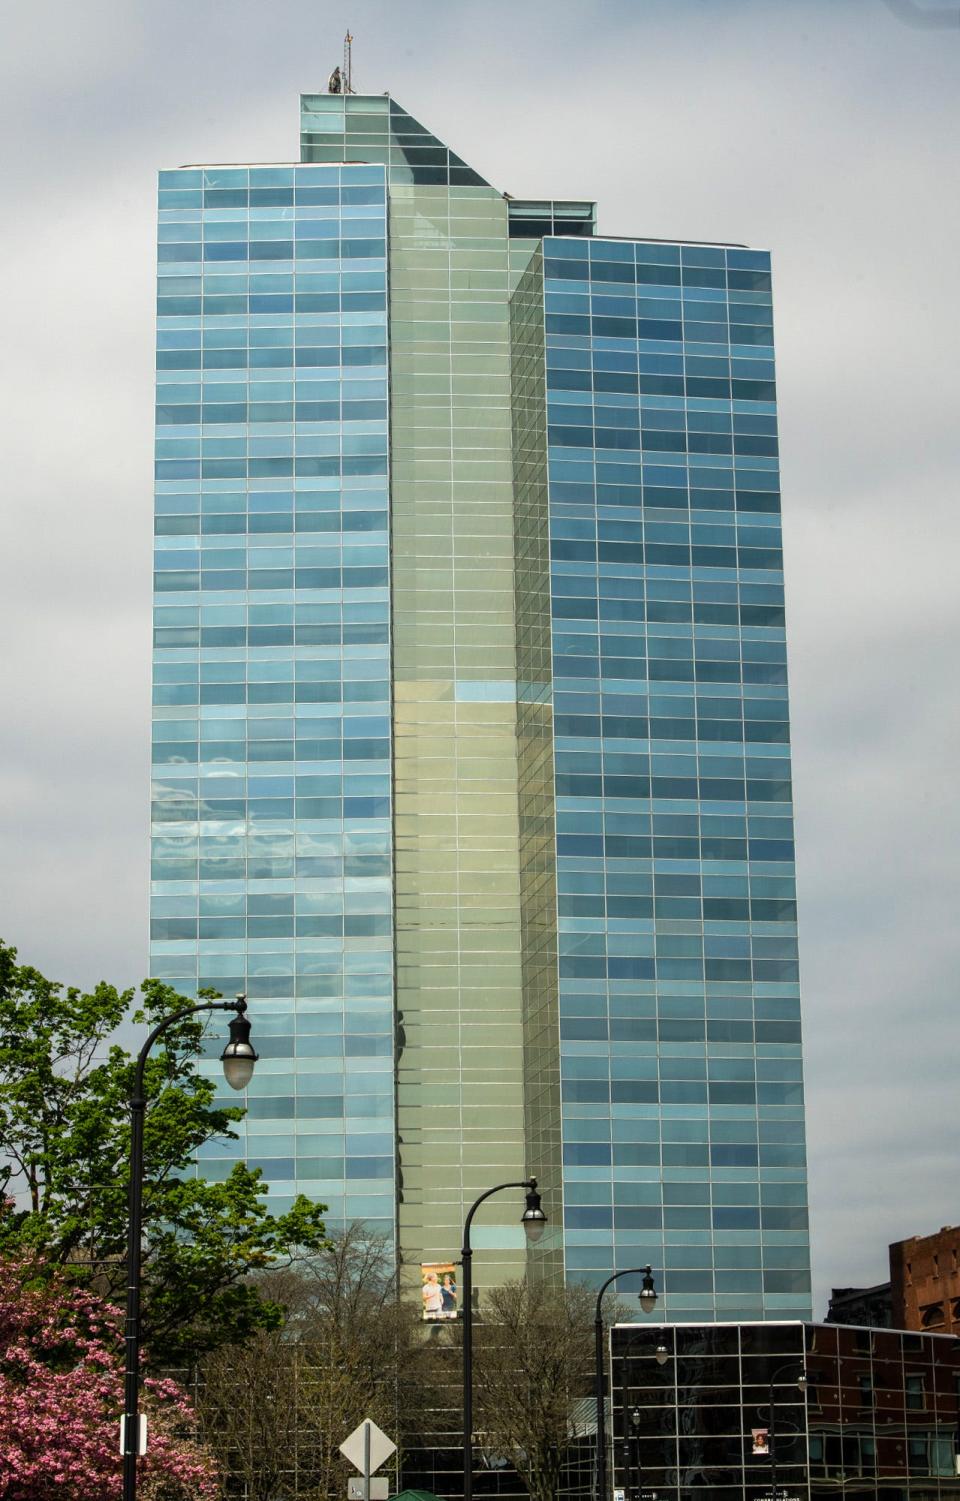 The Glass Tower rises 289 feet above Worcester. It matches the Skymark Tower as the city's tallest building.